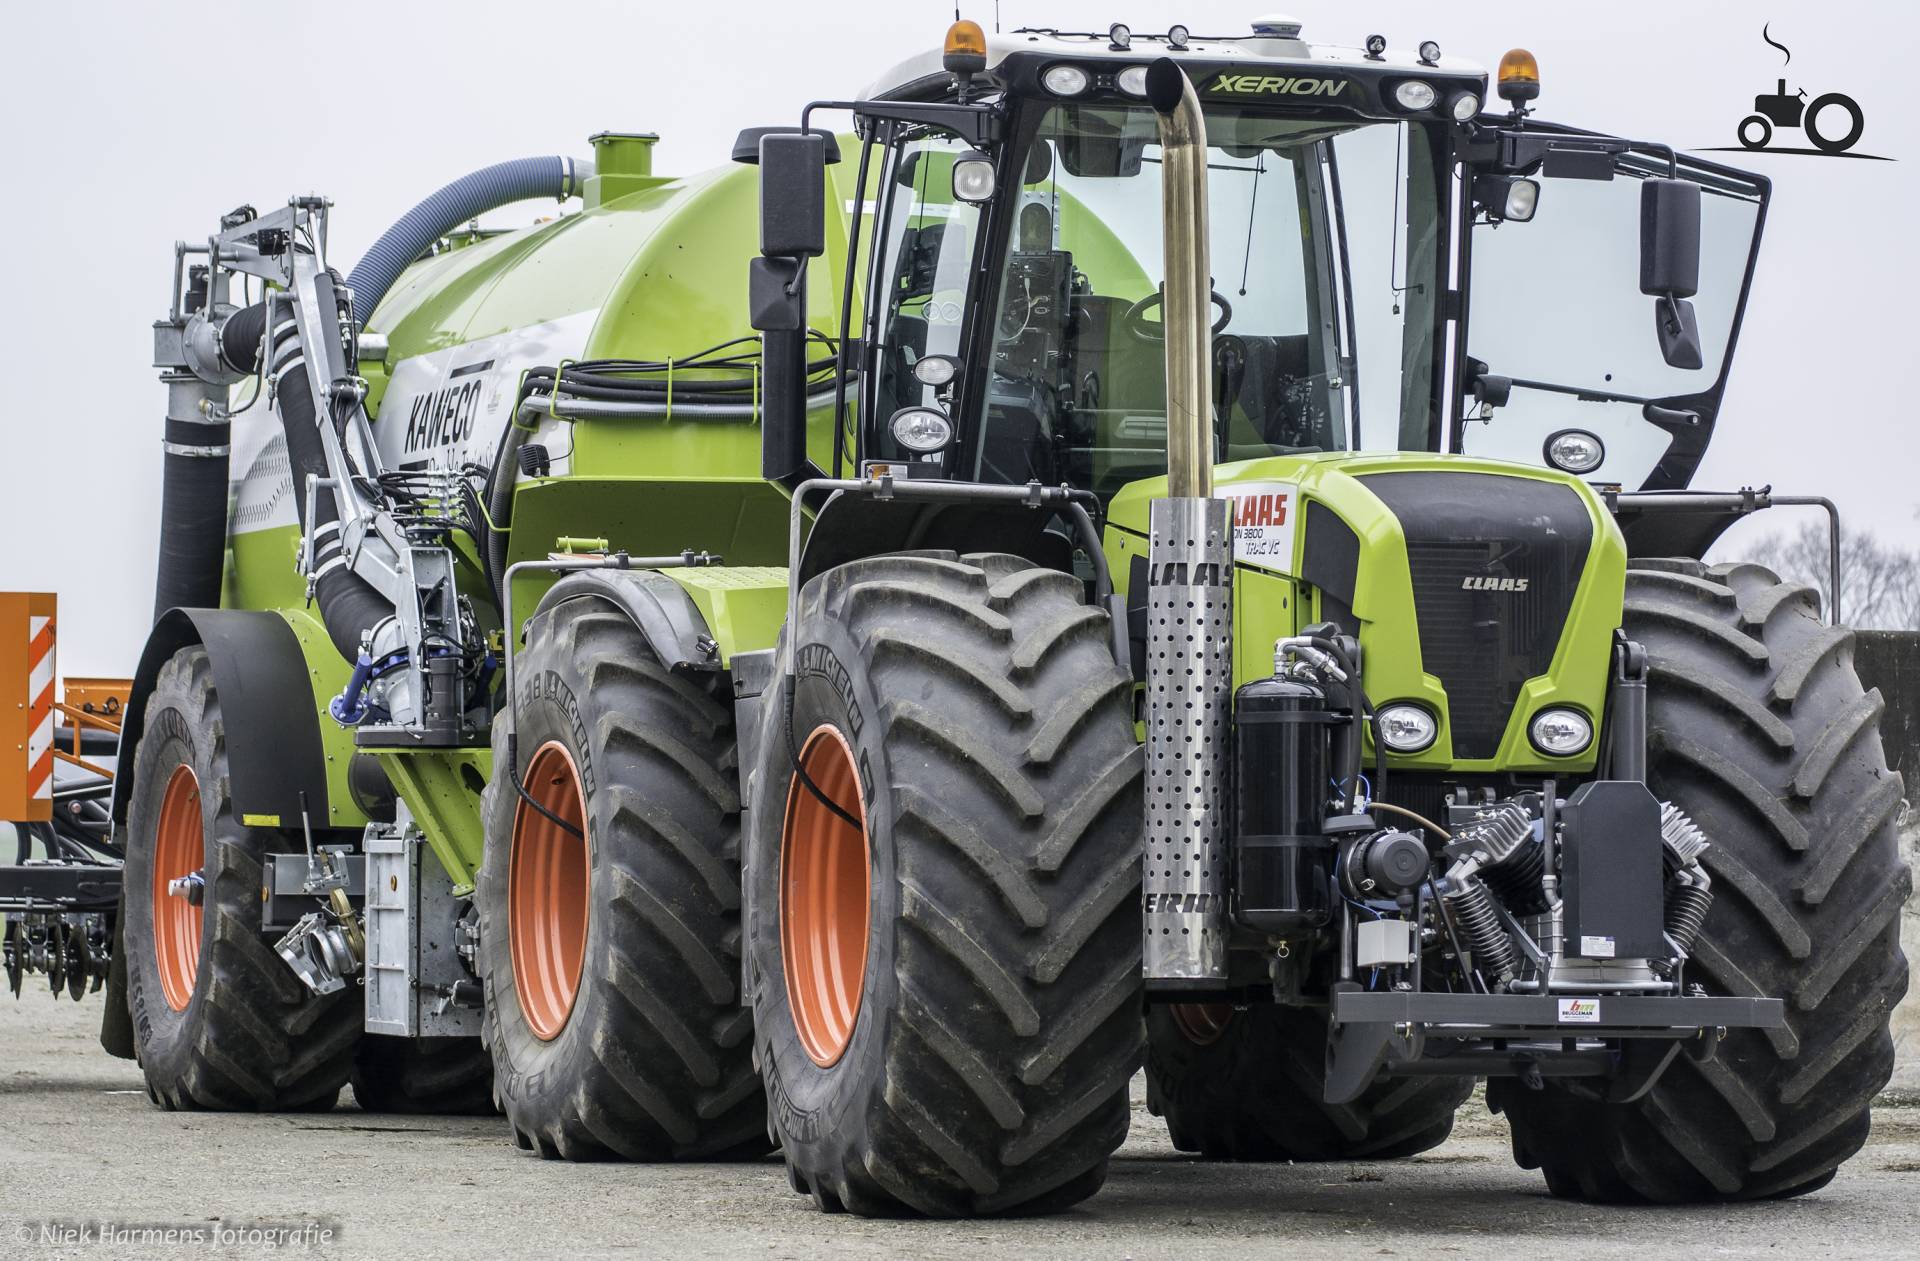 Claas Xerion 3800 TRAC